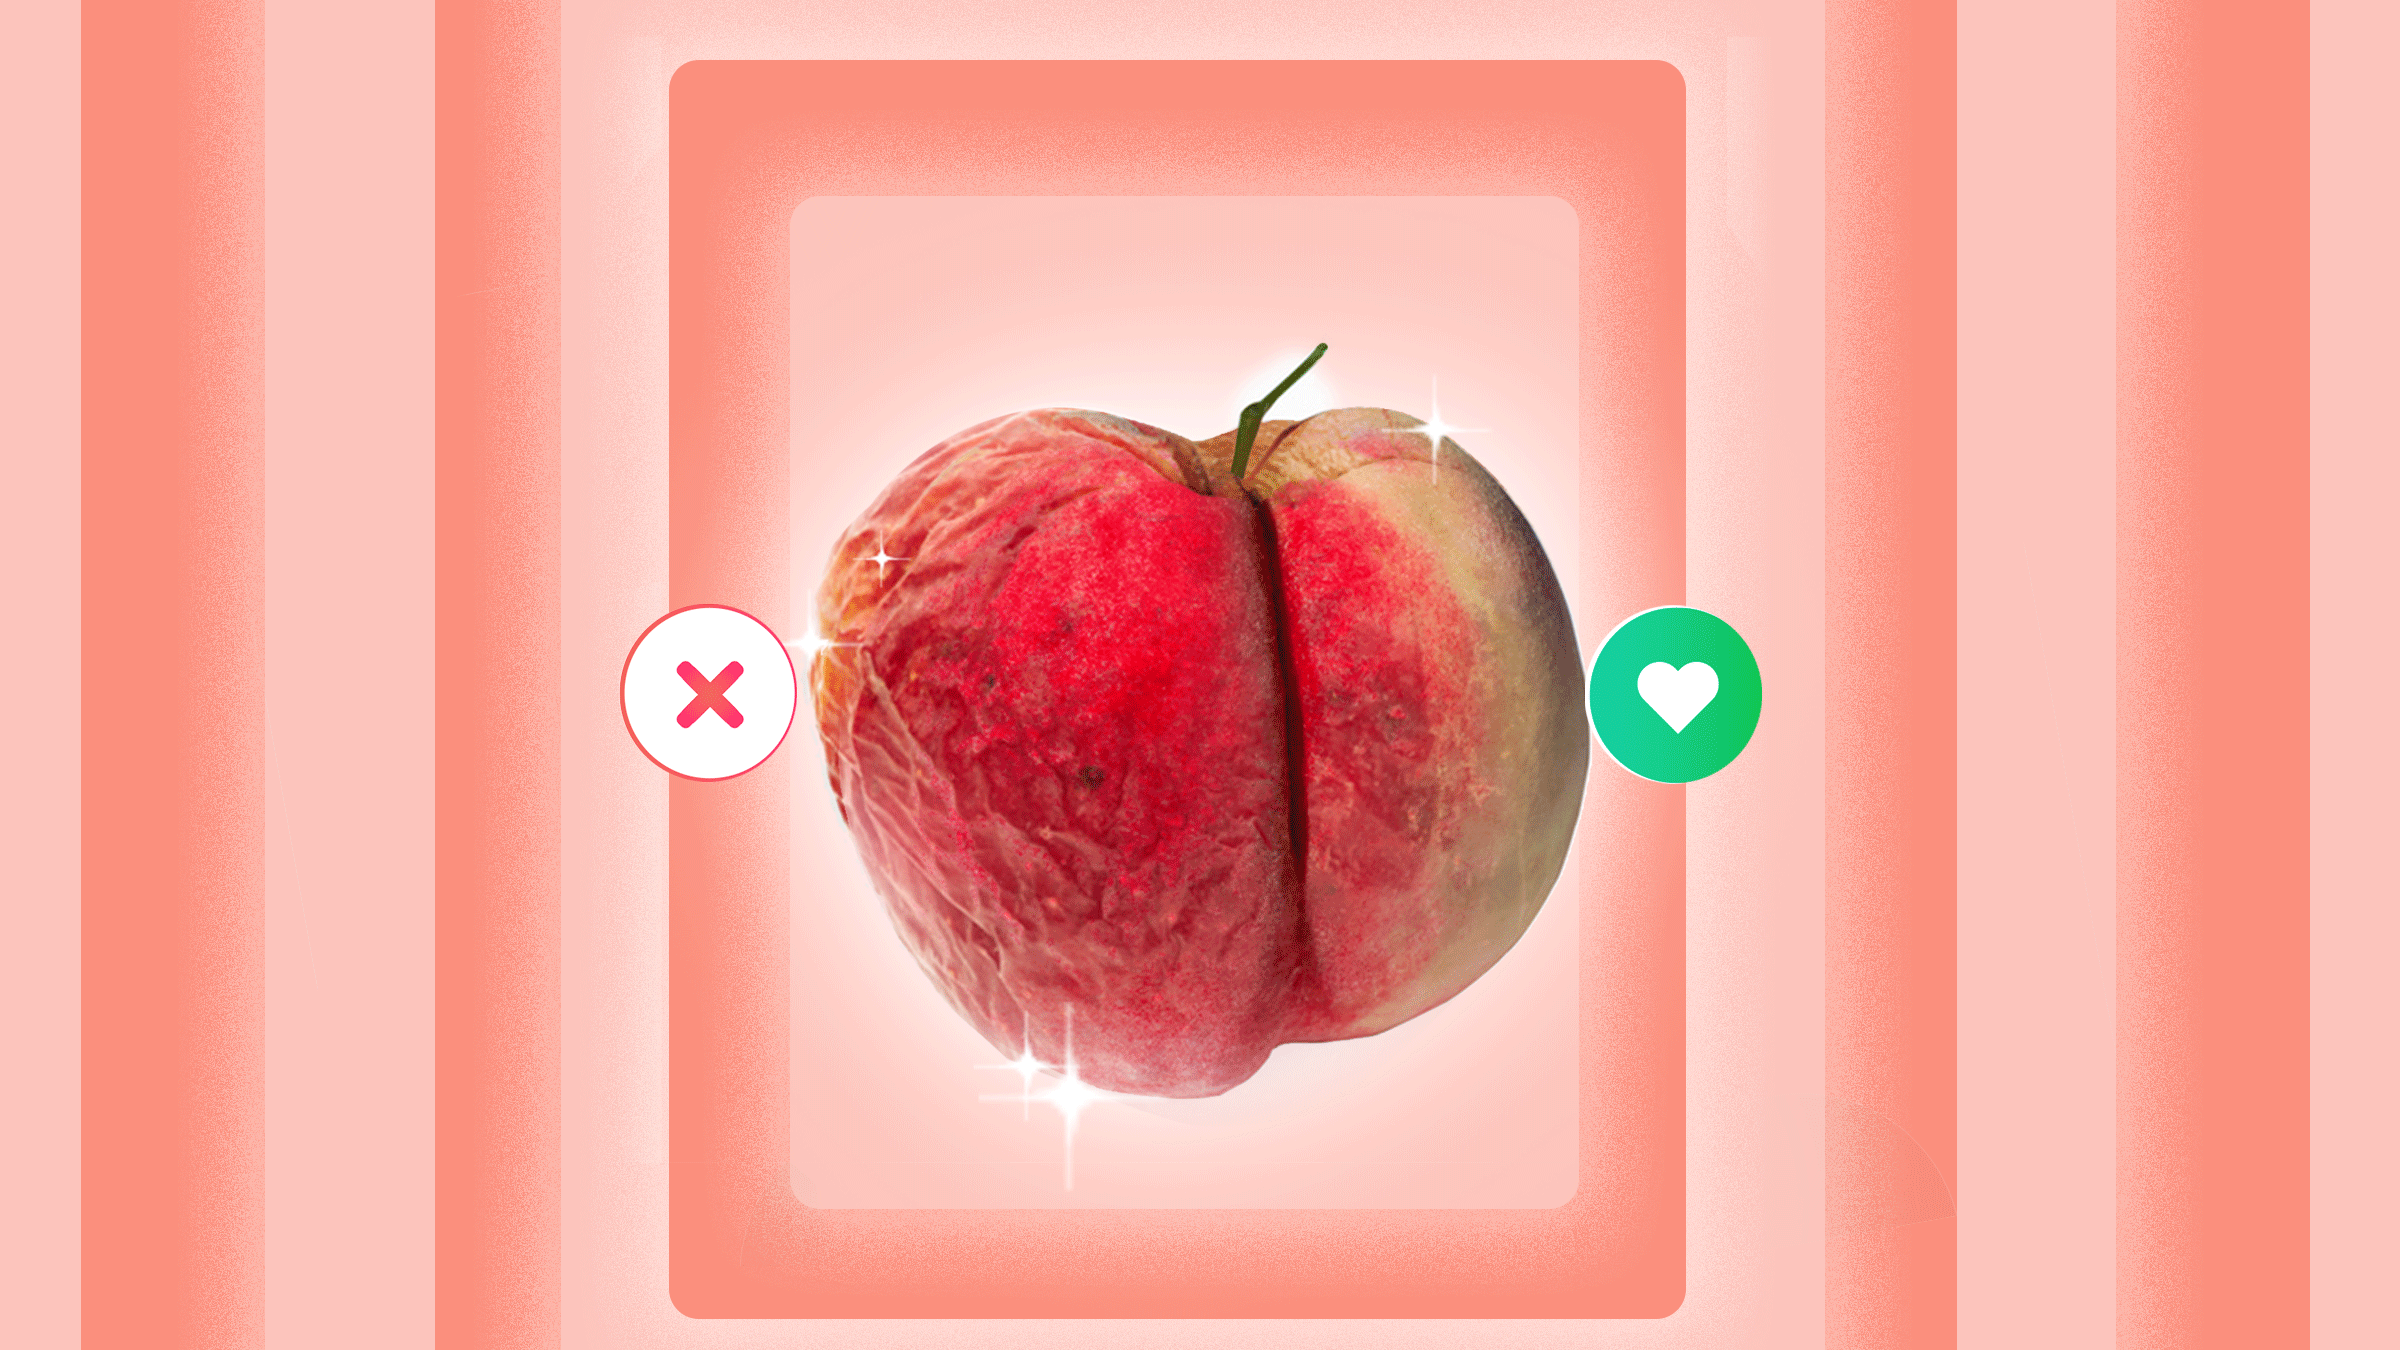 Icons from a dating app next to images of a wrinkled peach and a wrinkled eggplant.